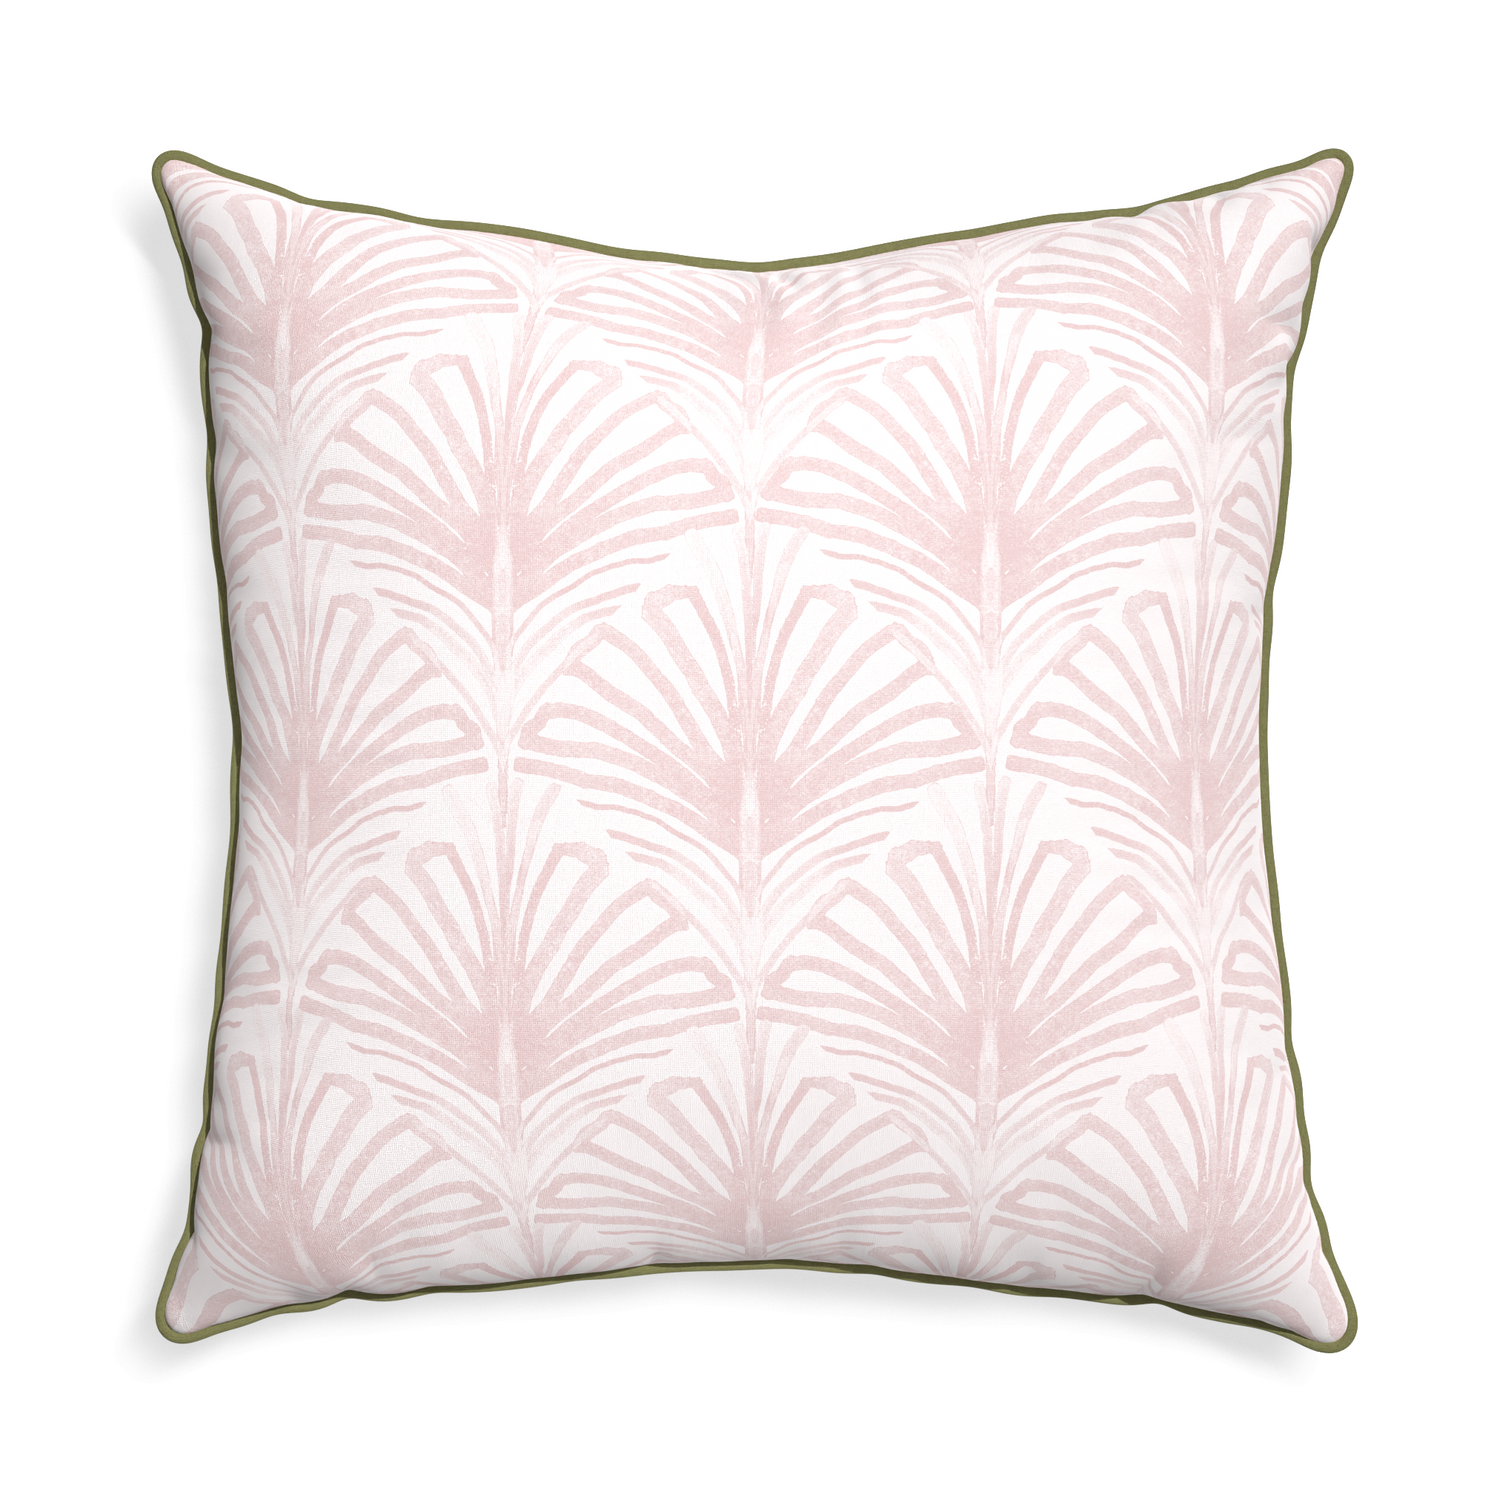 Euro-sham suzy rose custom pillow with moss piping on white background